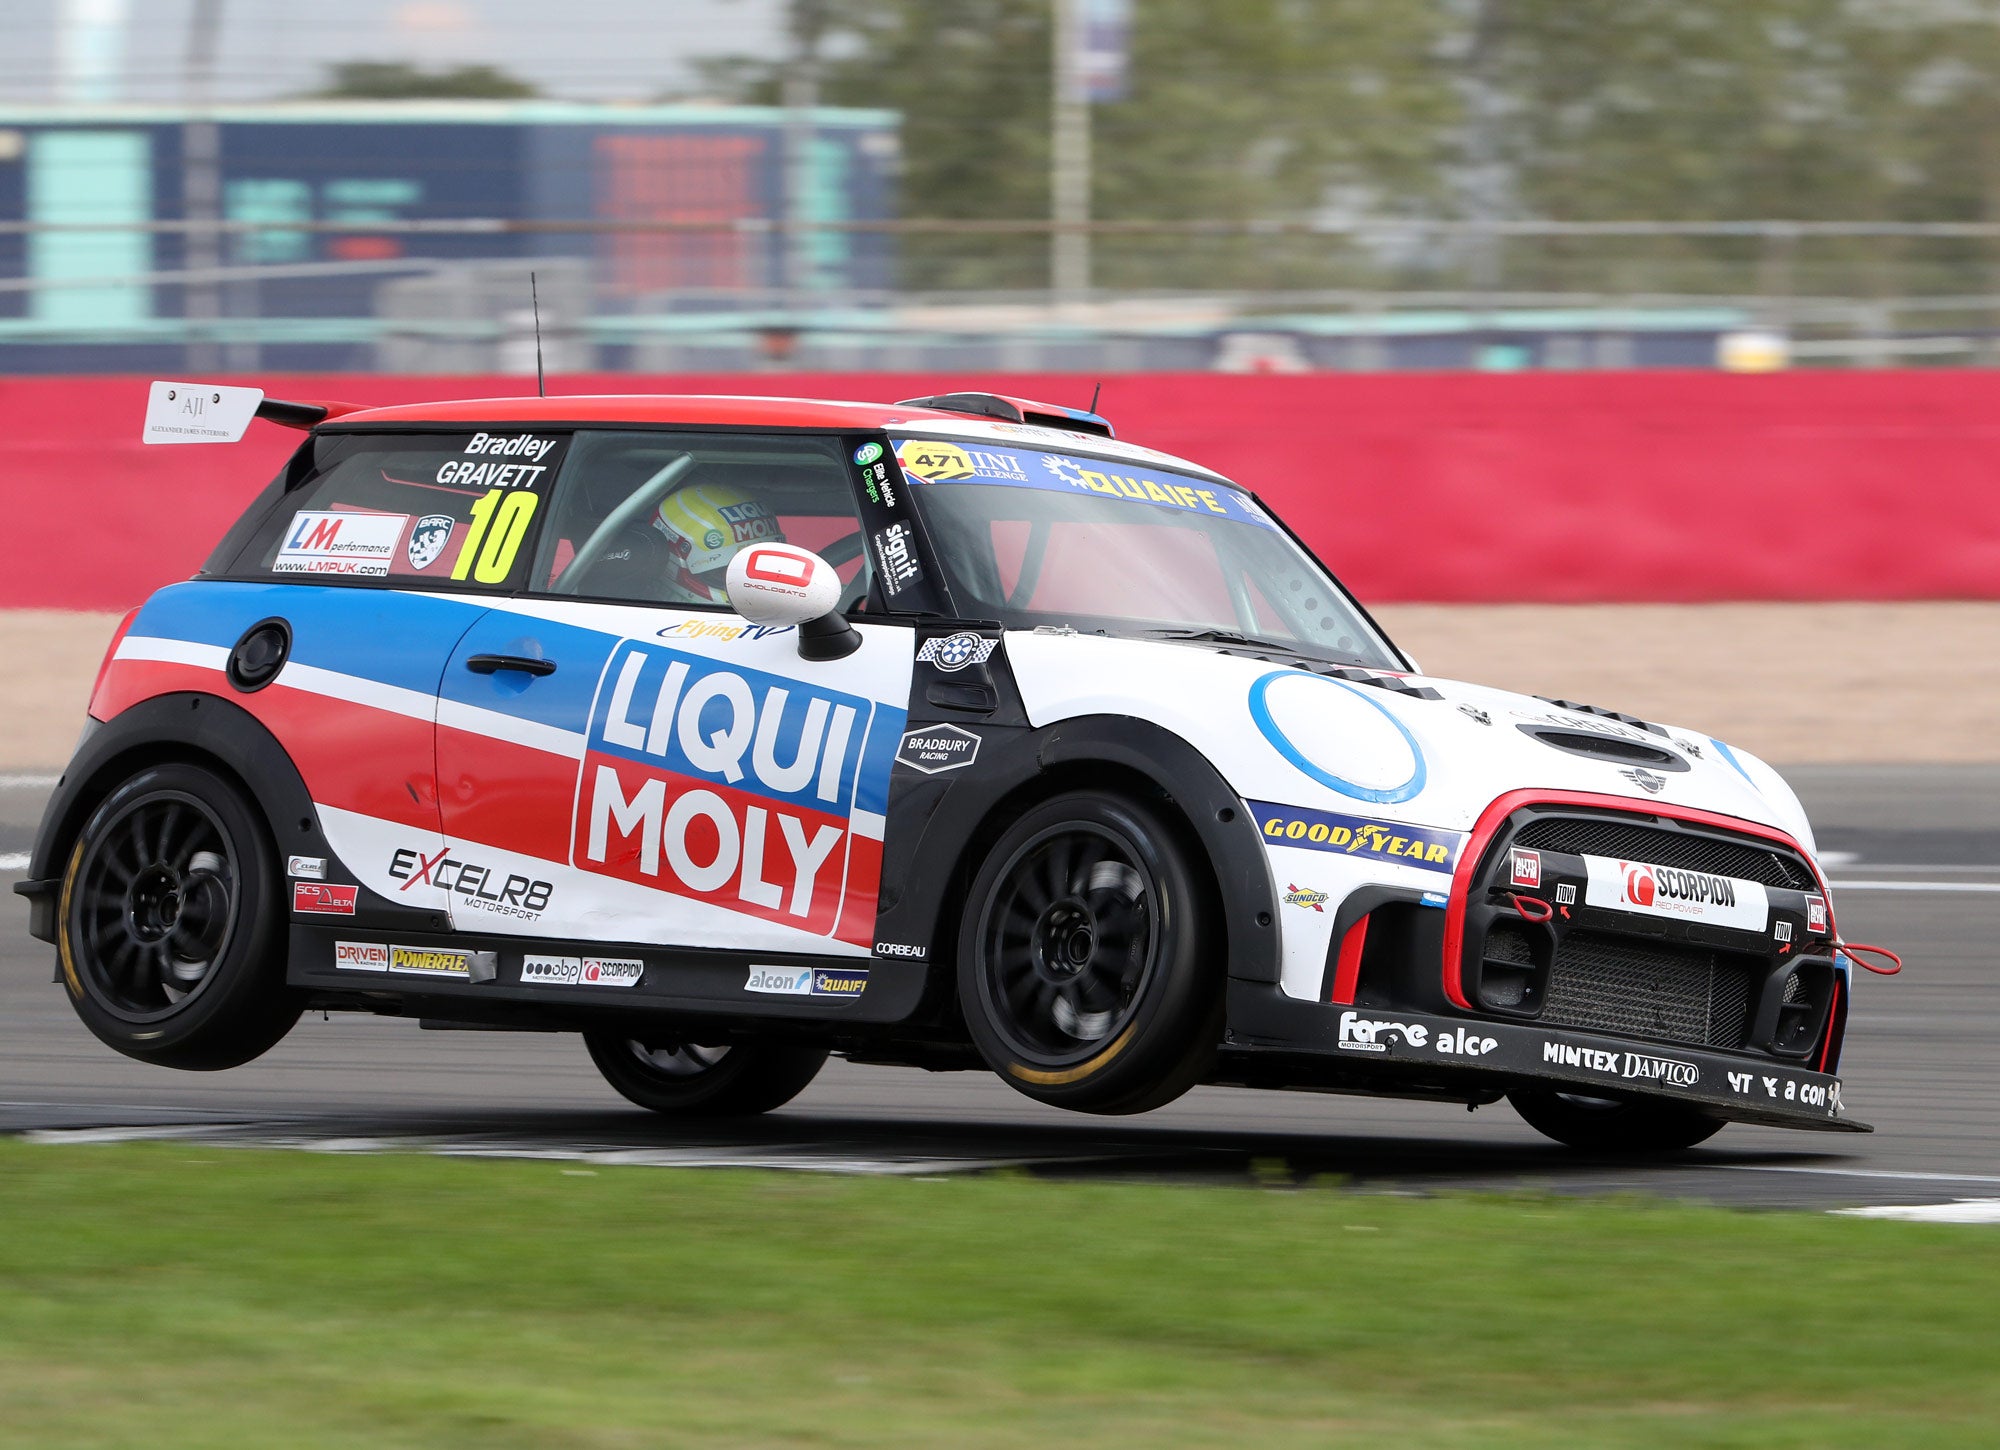 Bradley Gravett son of BTCC British Touring Car Champion Robb Gravett in the MINI Challenge JCW Series at Silverstone with EXCELR8 Motorsport on 2 wheels through Maggots Cooper Racing Driver LIQUI MOLY LM Performance Thinking it Better